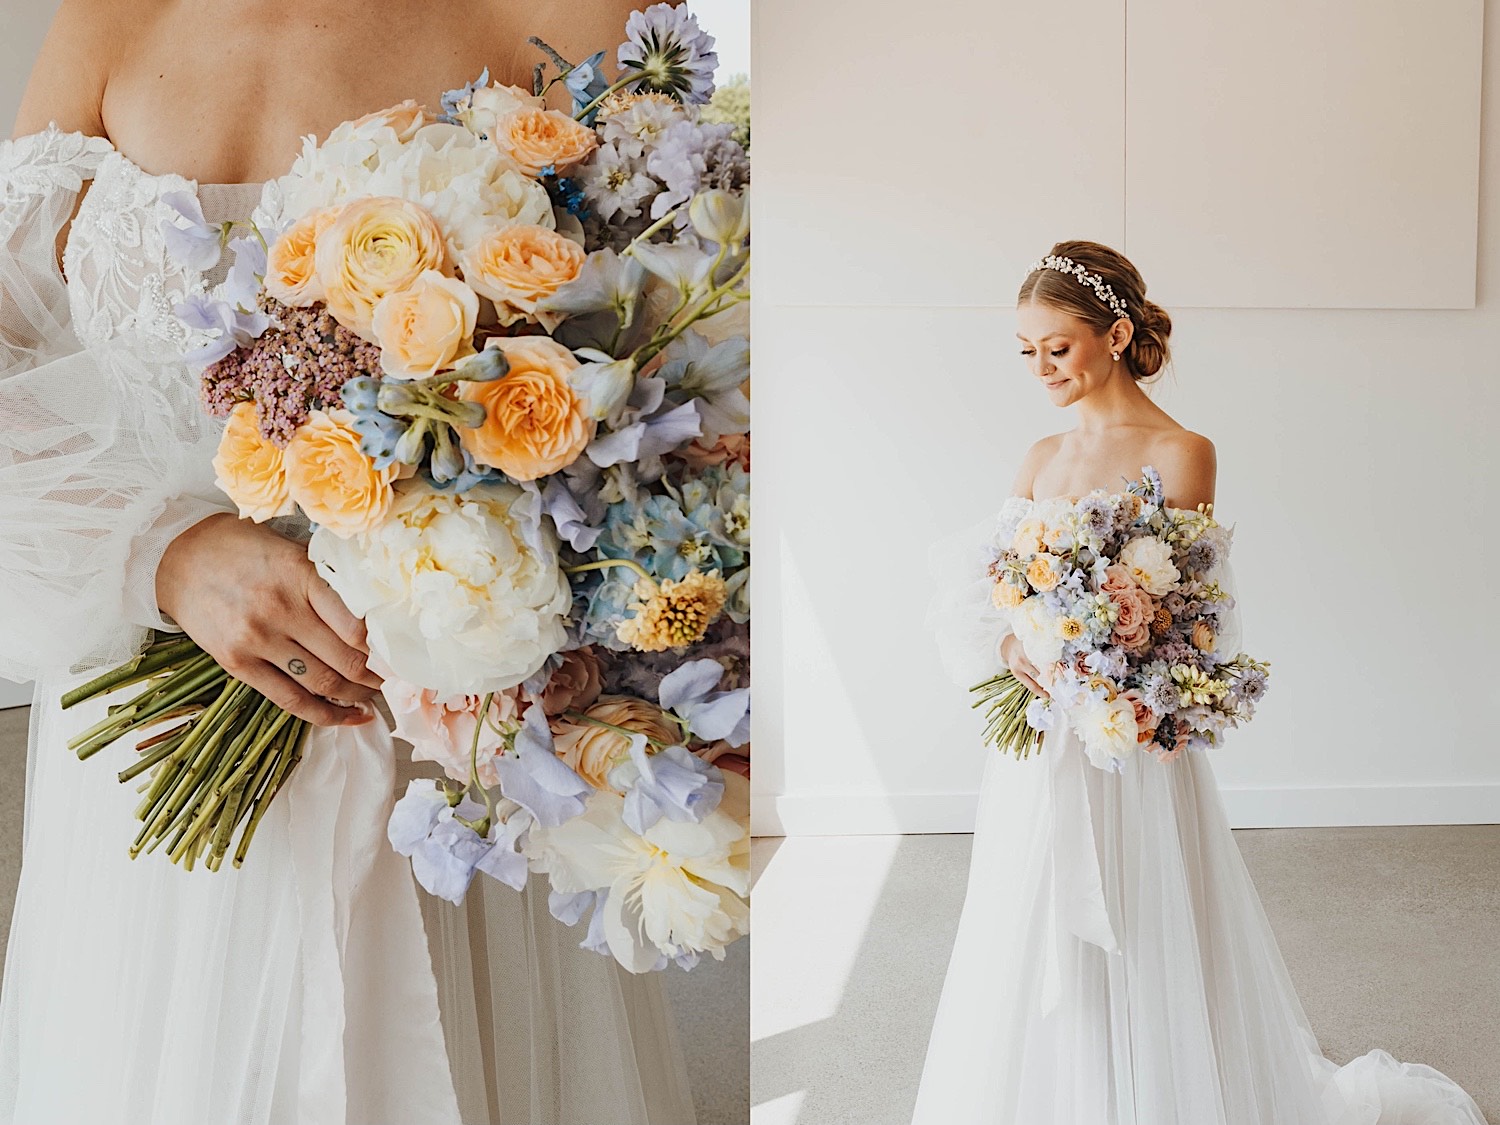 2 photos side by side, the left is a close up of a bouquet of flowers being held by a bride, the right is the same bride and bouquet but taken further away